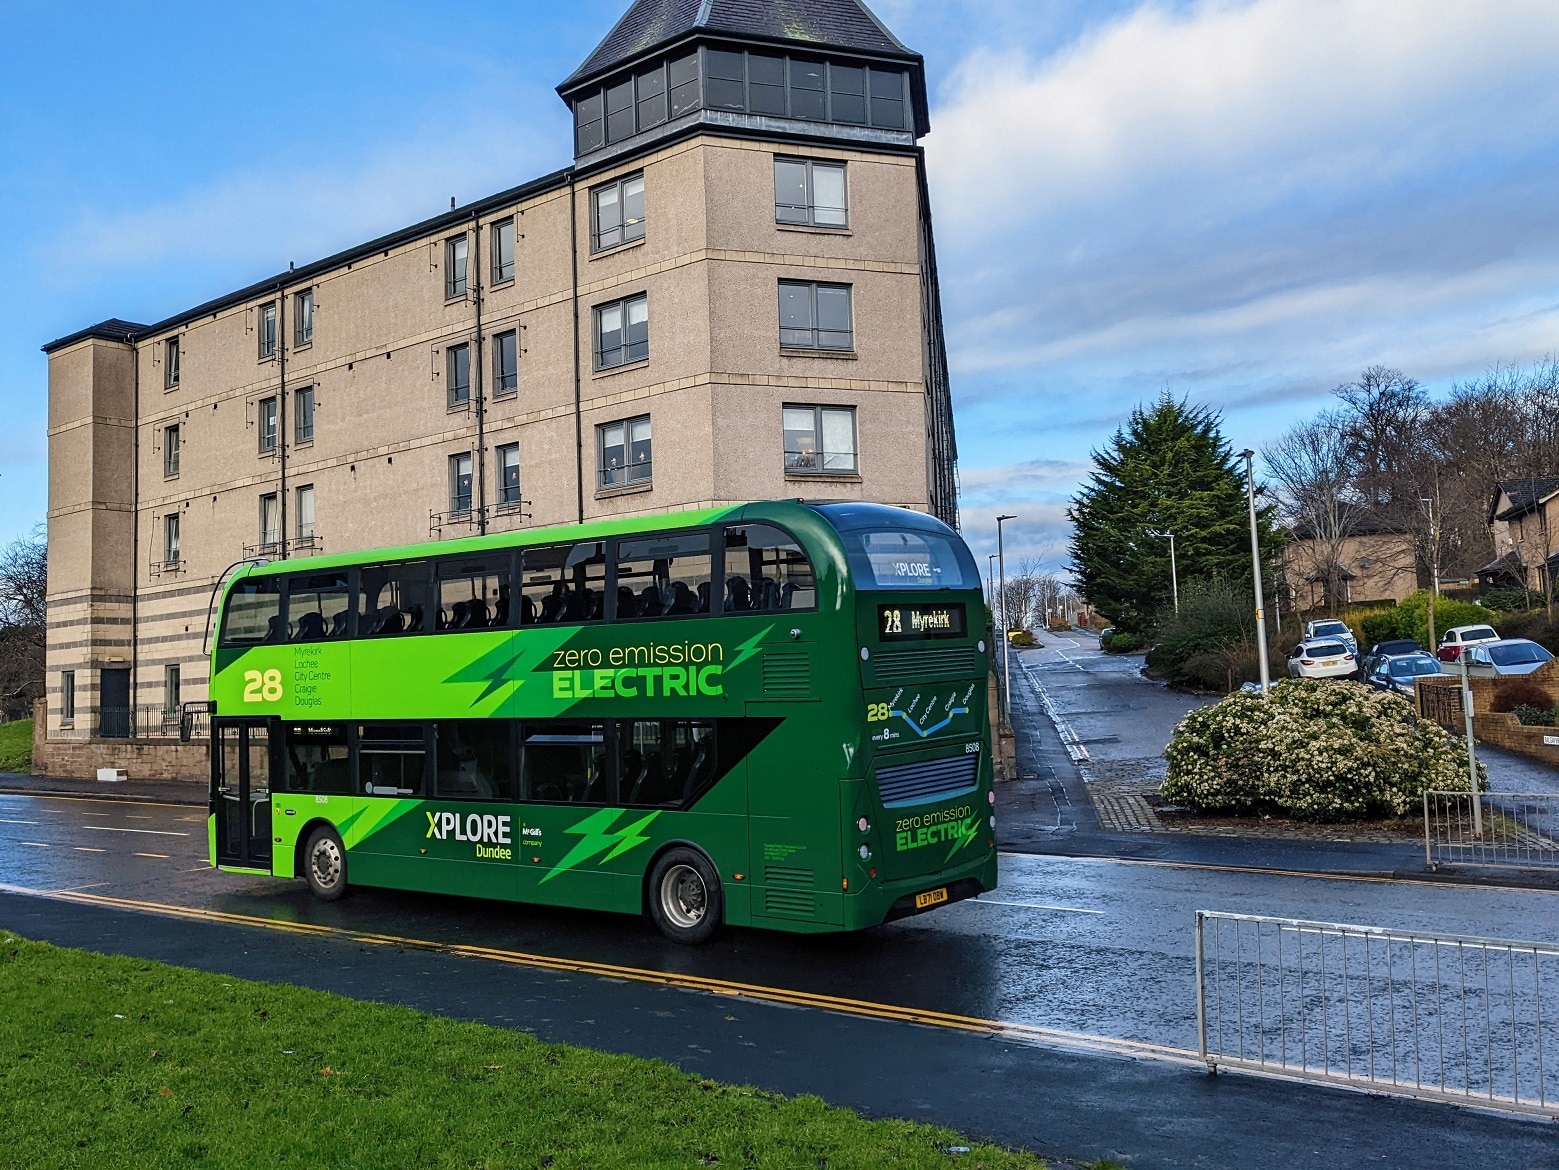 Free bus travel for refugees arriving in Dundee to be offered